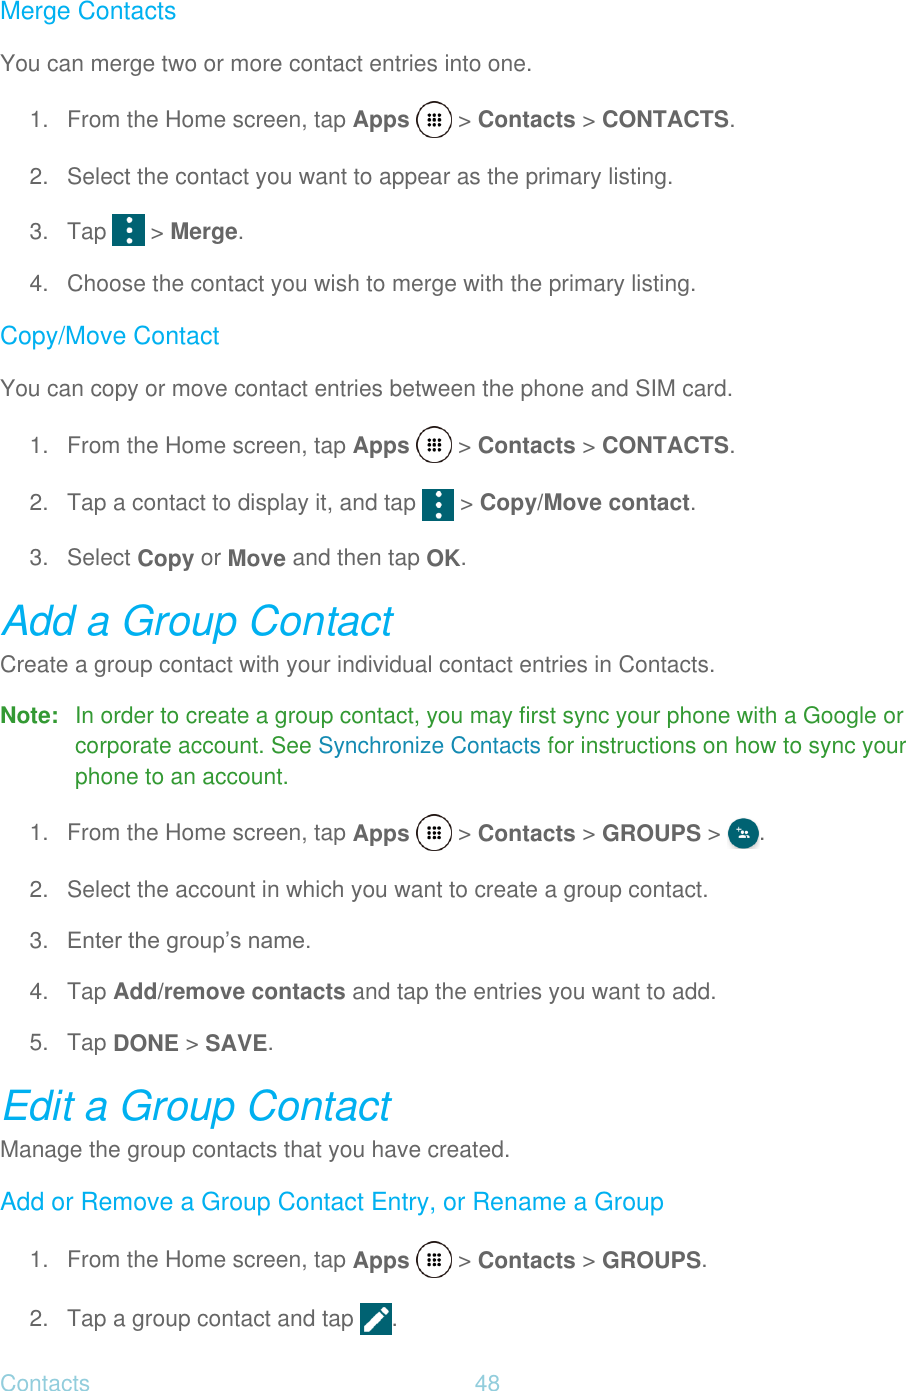 Contacts  48   Merge Contacts You can merge two or more contact entries into one. 1.  From the Home screen, tap Apps   &gt; Contacts &gt; CONTACTS. 2.  Select the contact you want to appear as the primary listing. 3. Tap   &gt; Merge. 4.  Choose the contact you wish to merge with the primary listing. Copy/Move Contact You can copy or move contact entries between the phone and SIM card. 1.  From the Home screen, tap Apps   &gt; Contacts &gt; CONTACTS. 2.  Tap a contact to display it, and tap   &gt; Copy/Move contact. 3.  Select Copy or Move and then tap OK. Add a Group Contact Create a group contact with your individual contact entries in Contacts. Note:  In order to create a group contact, you may first sync your phone with a Google or corporate account. See Synchronize Contacts for instructions on how to sync your phone to an account. 1.  From the Home screen, tap Apps   &gt; Contacts &gt; GROUPS &gt;  . 2.  Select the account in which you want to create a group contact. 3. Enter the group’s name. 4. Tap Add/remove contacts and tap the entries you want to add. 5. Tap DONE &gt; SAVE. Edit a Group Contact Manage the group contacts that you have created. Add or Remove a Group Contact Entry, or Rename a Group 1.  From the Home screen, tap Apps   &gt; Contacts &gt; GROUPS. 2. Tap a group contact and tap  . 